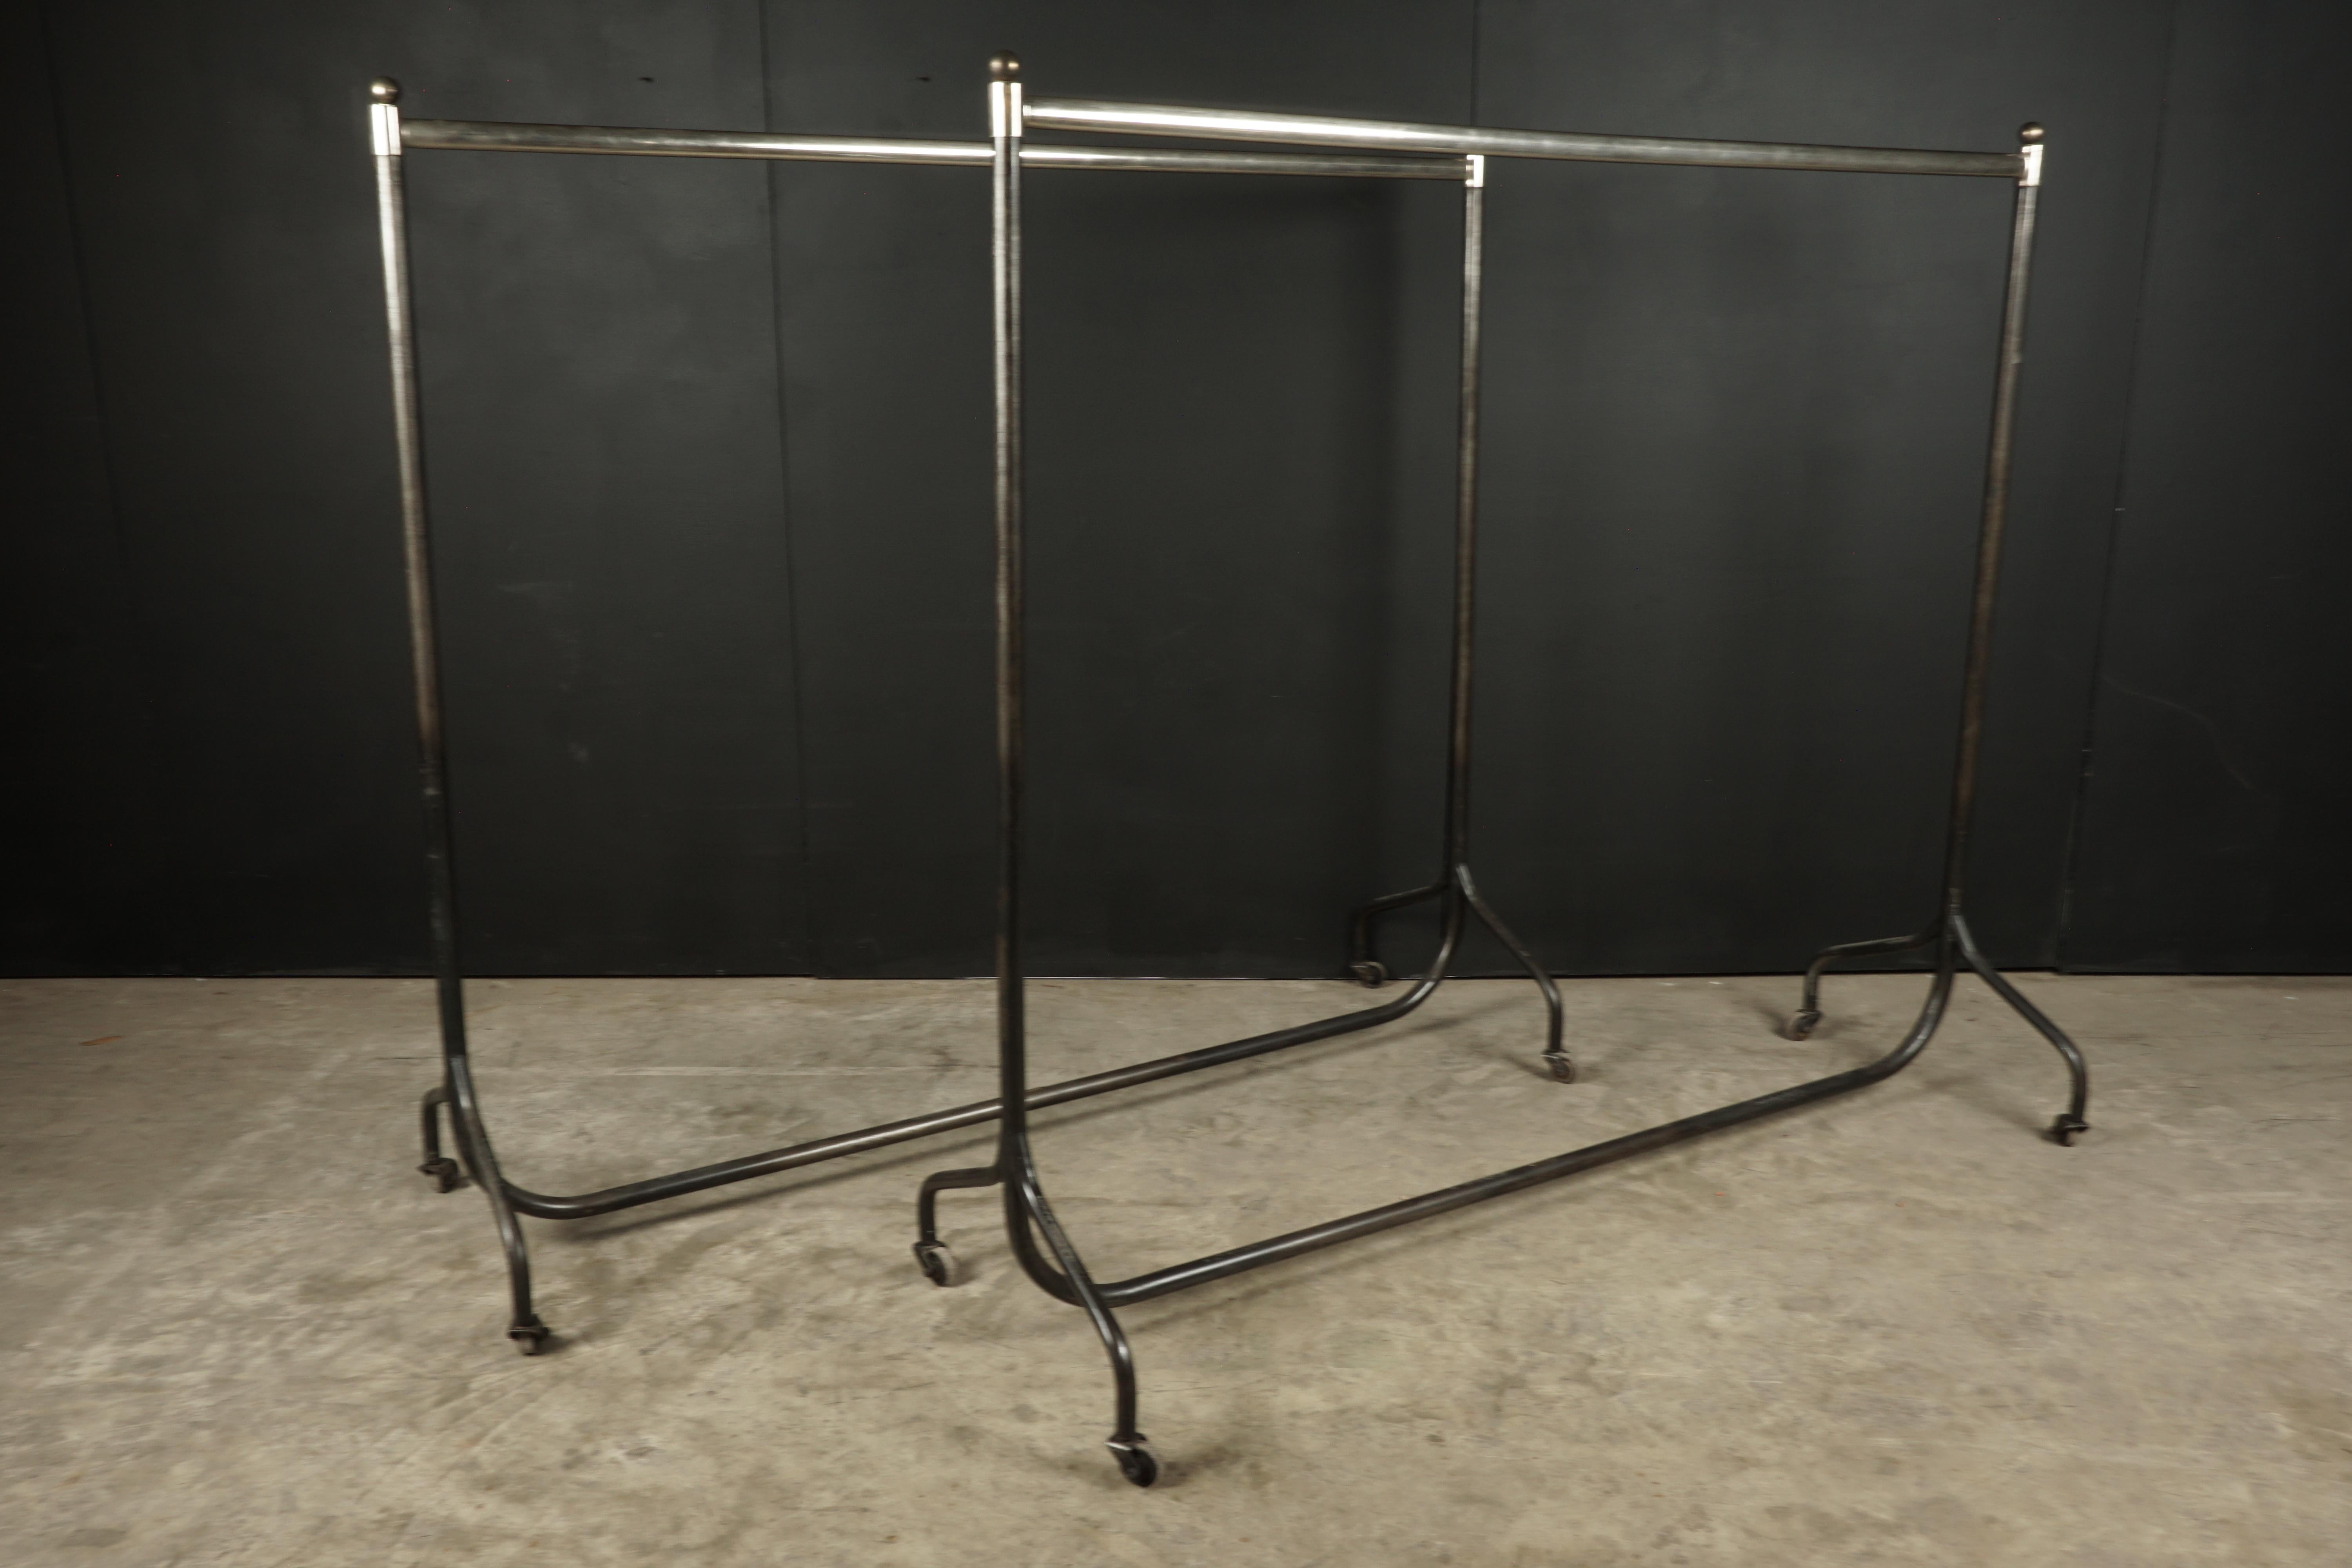 Pair of clothing racks from France, manufactured by Siegel, Paris. Chrome and steel construction with functional castors.